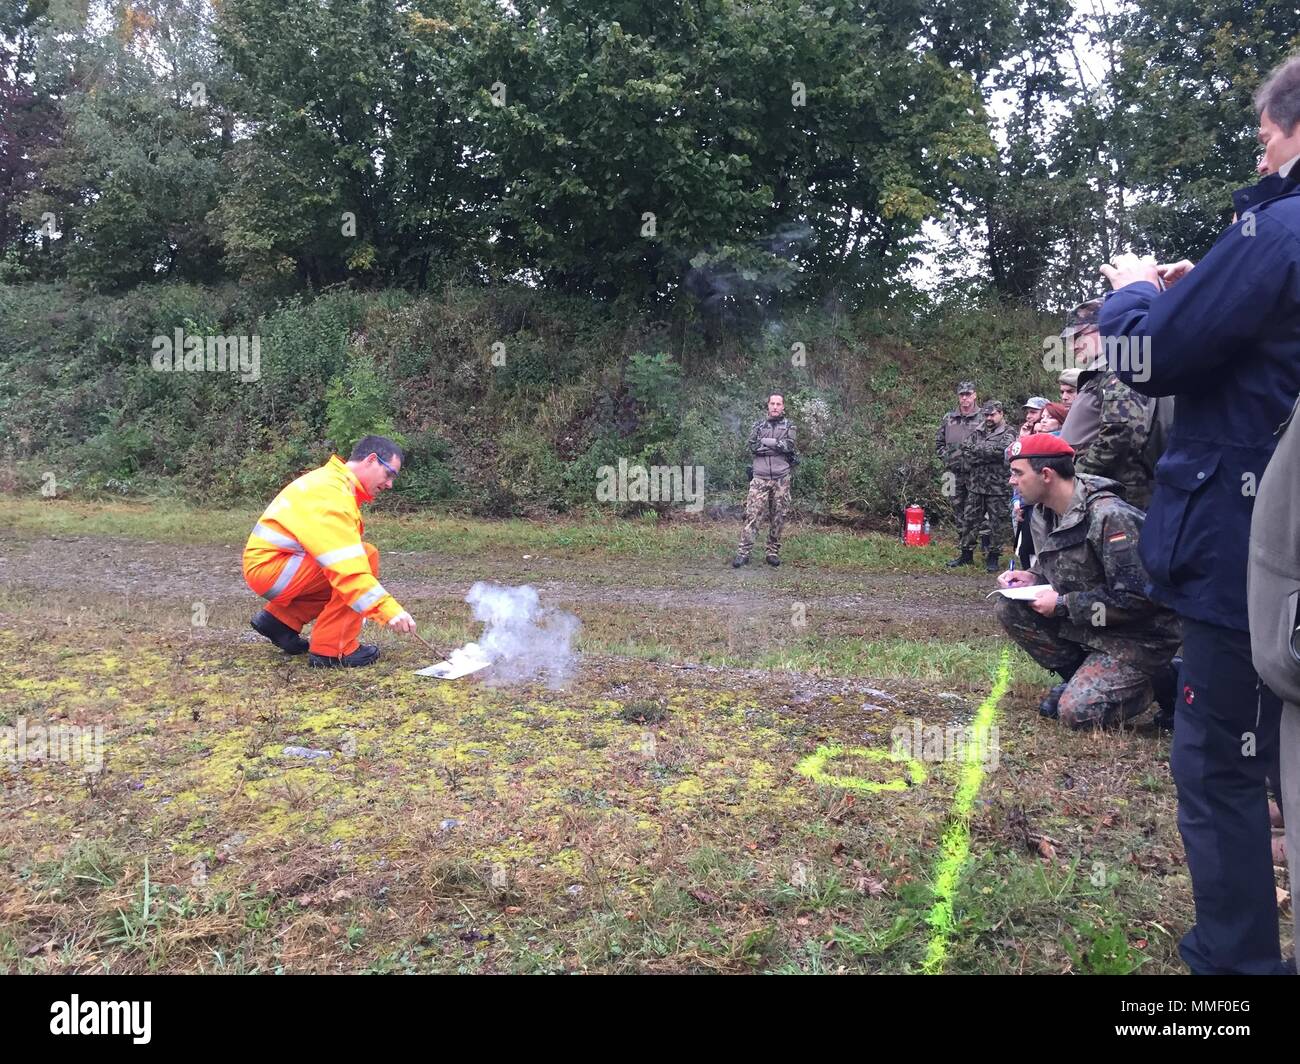 An ammunition technician from Armasuisse provides a pyrotechnics demonstration to military and civilian personnel of Organization for Security Cooperation in Europe member states during the Swiss Army Ammunition Site Assessment Course near Thun, Switzerland on September 27, 2017. Stock Photo